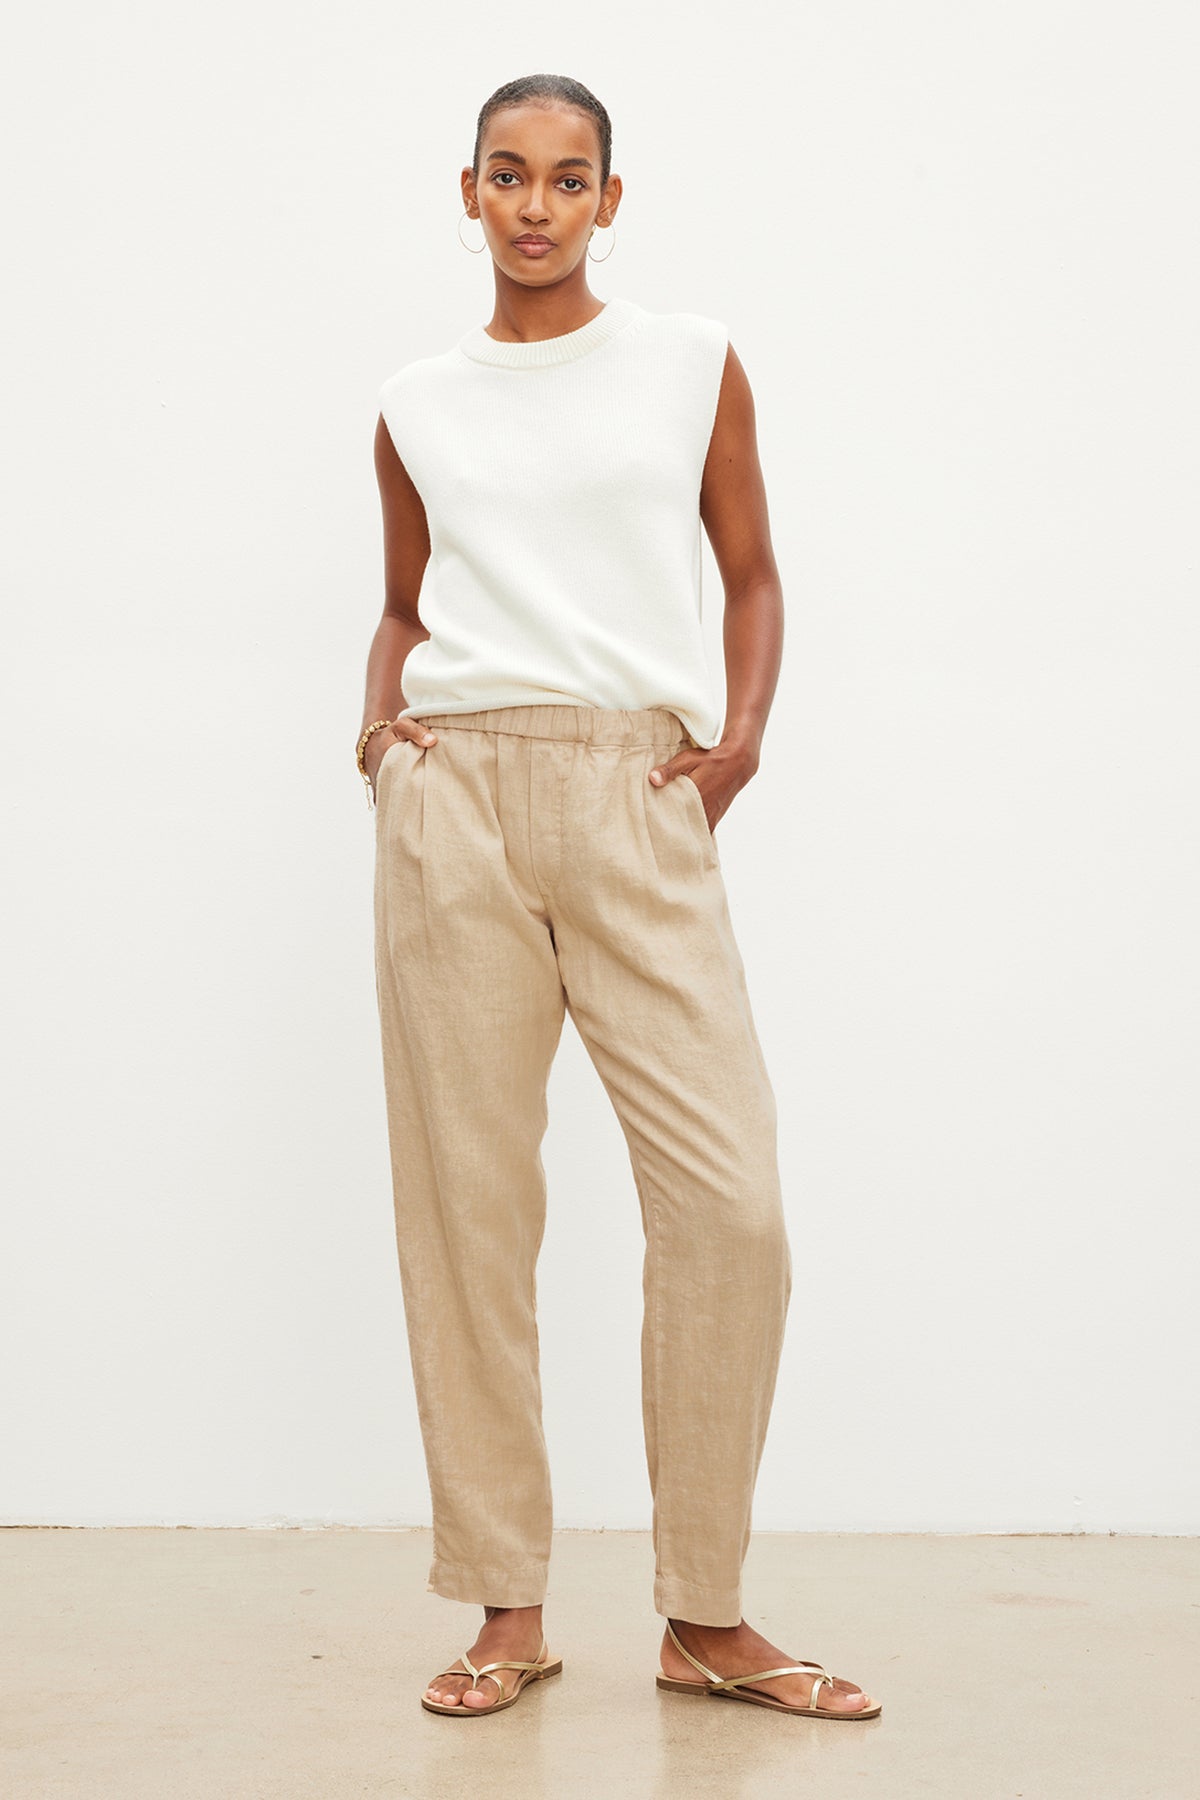 16 Pairs of Elastic-Waist Pants to Wear Instead of Your Sweats